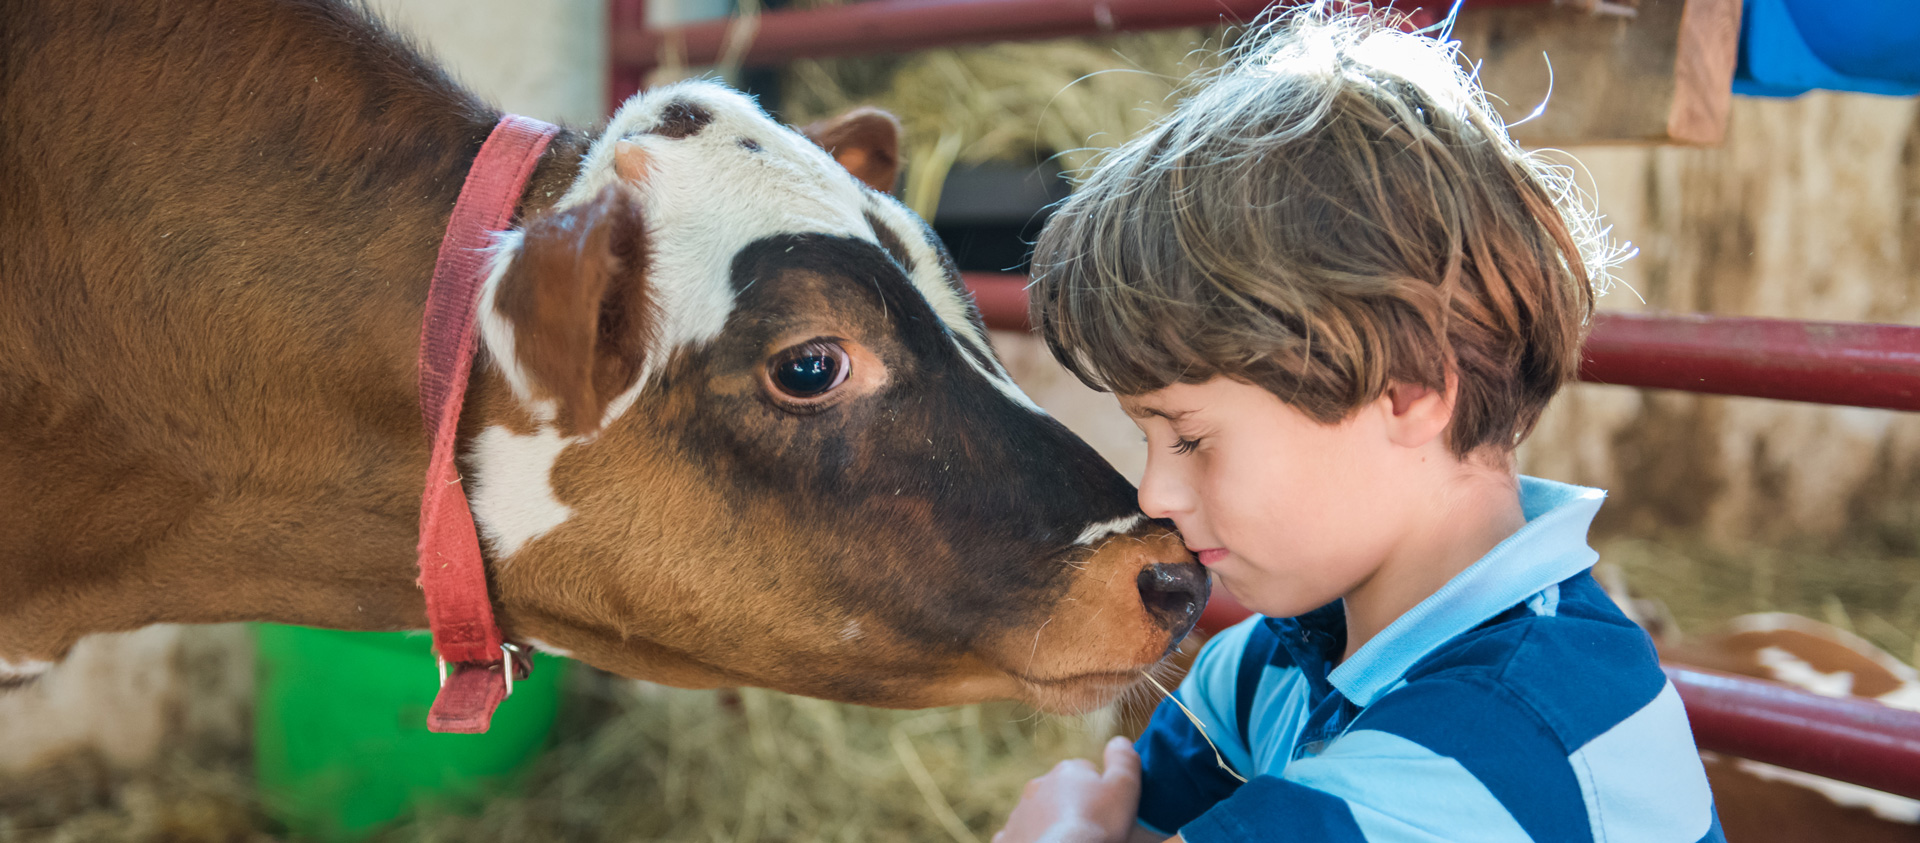 A cow lovingly nuzzles a young boy's face